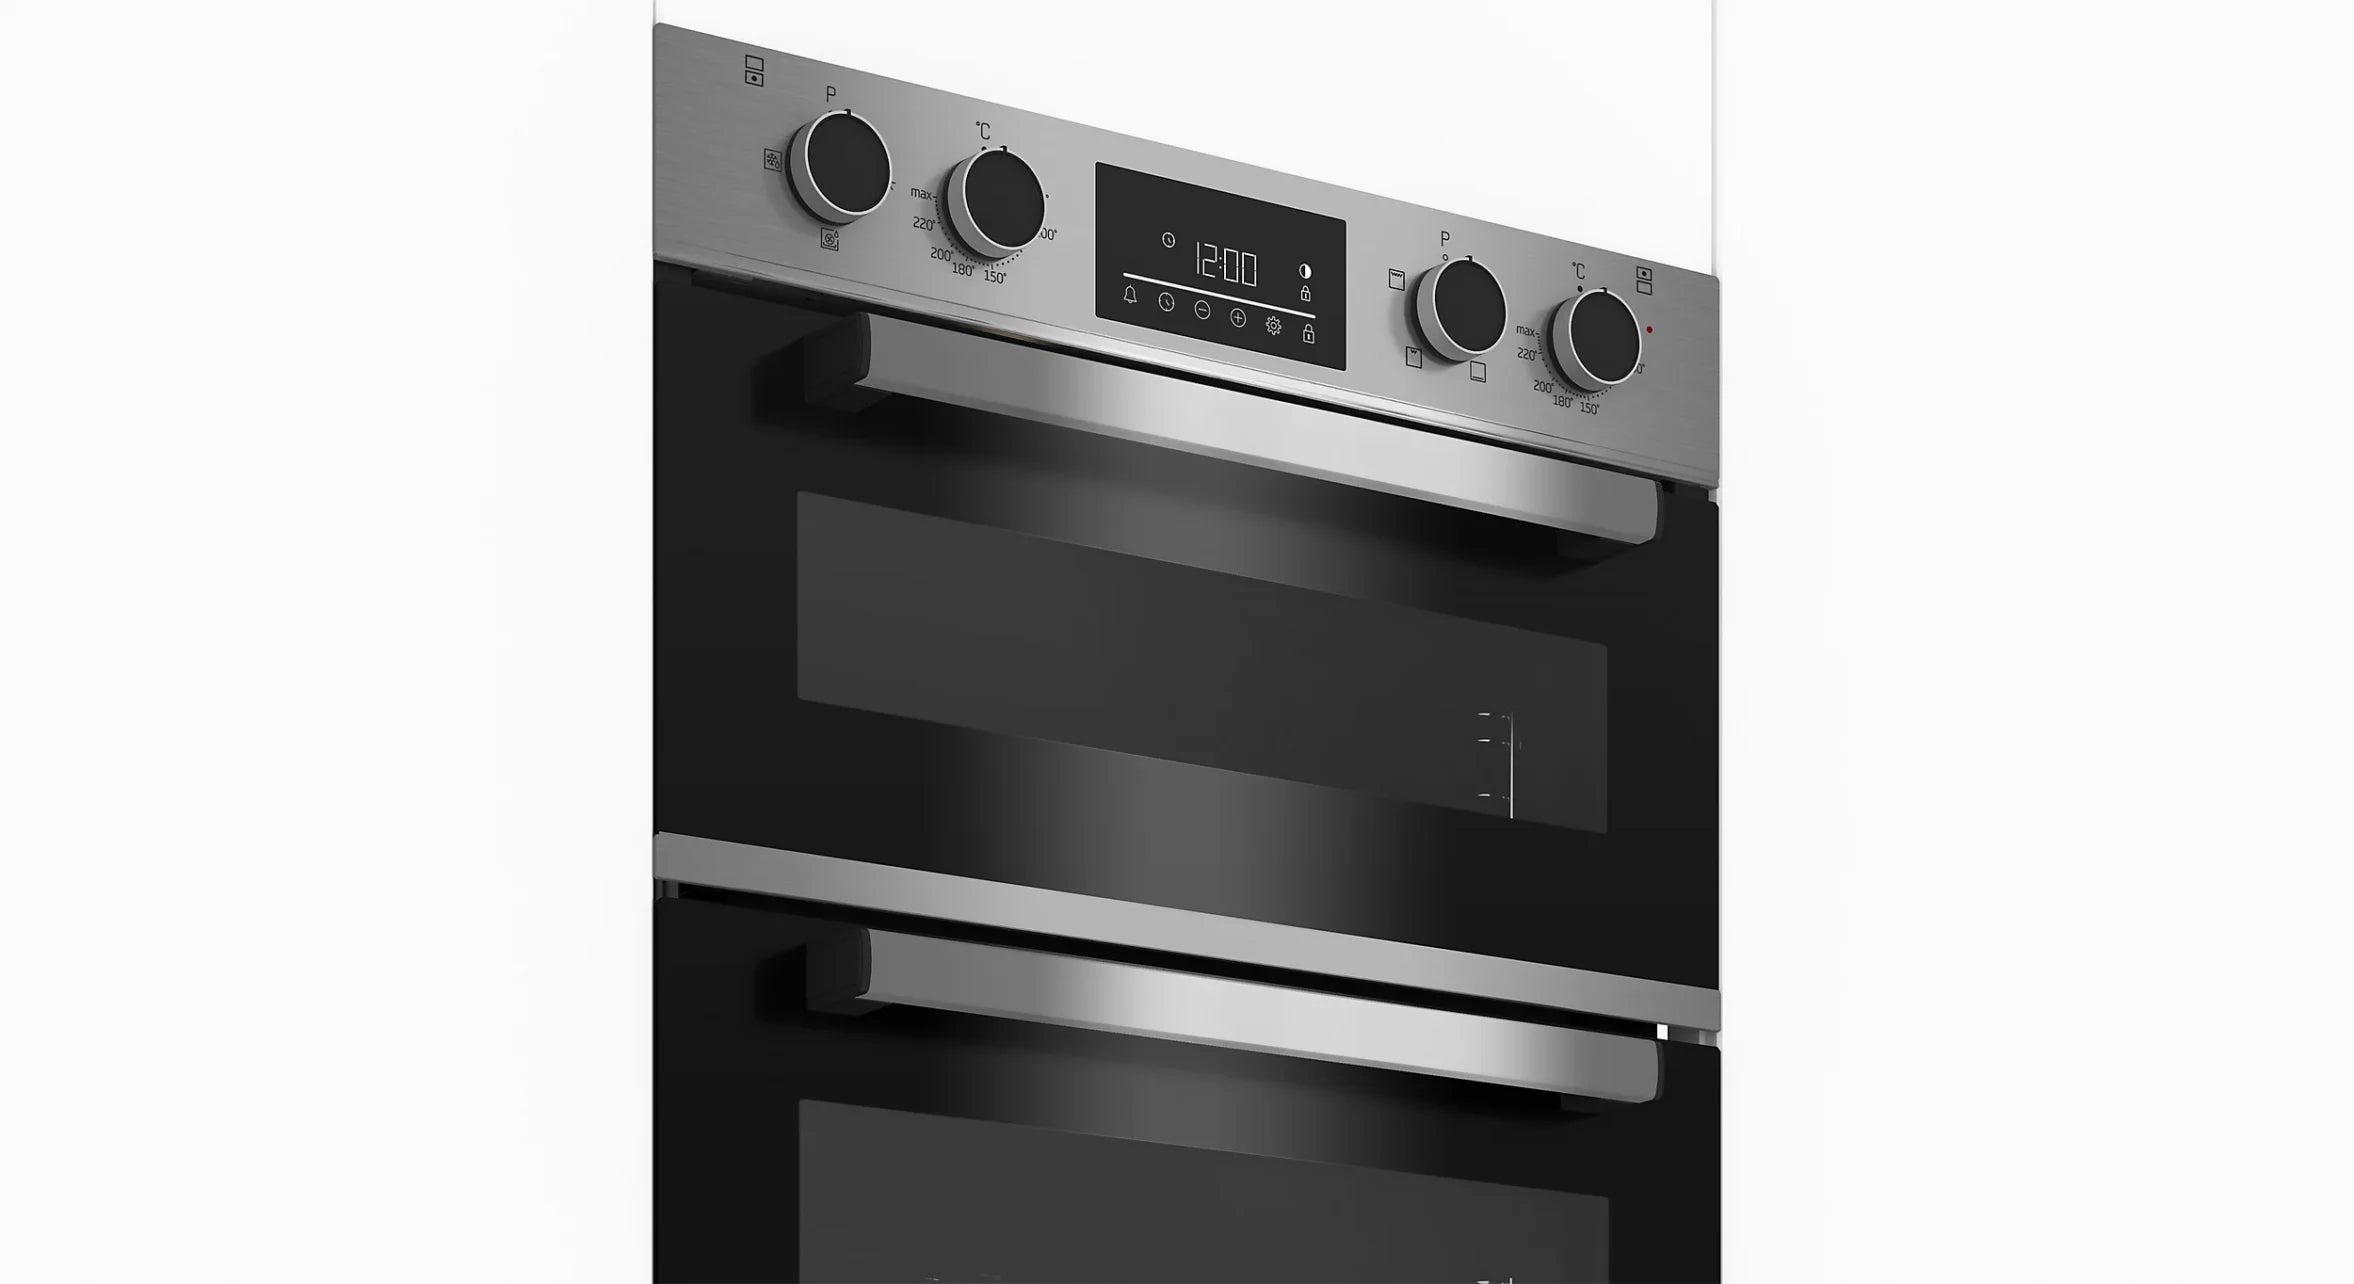 Beko-Double Oven-Stainless Steel-Built in-Back-BBDQF22300X-X-Display 0096